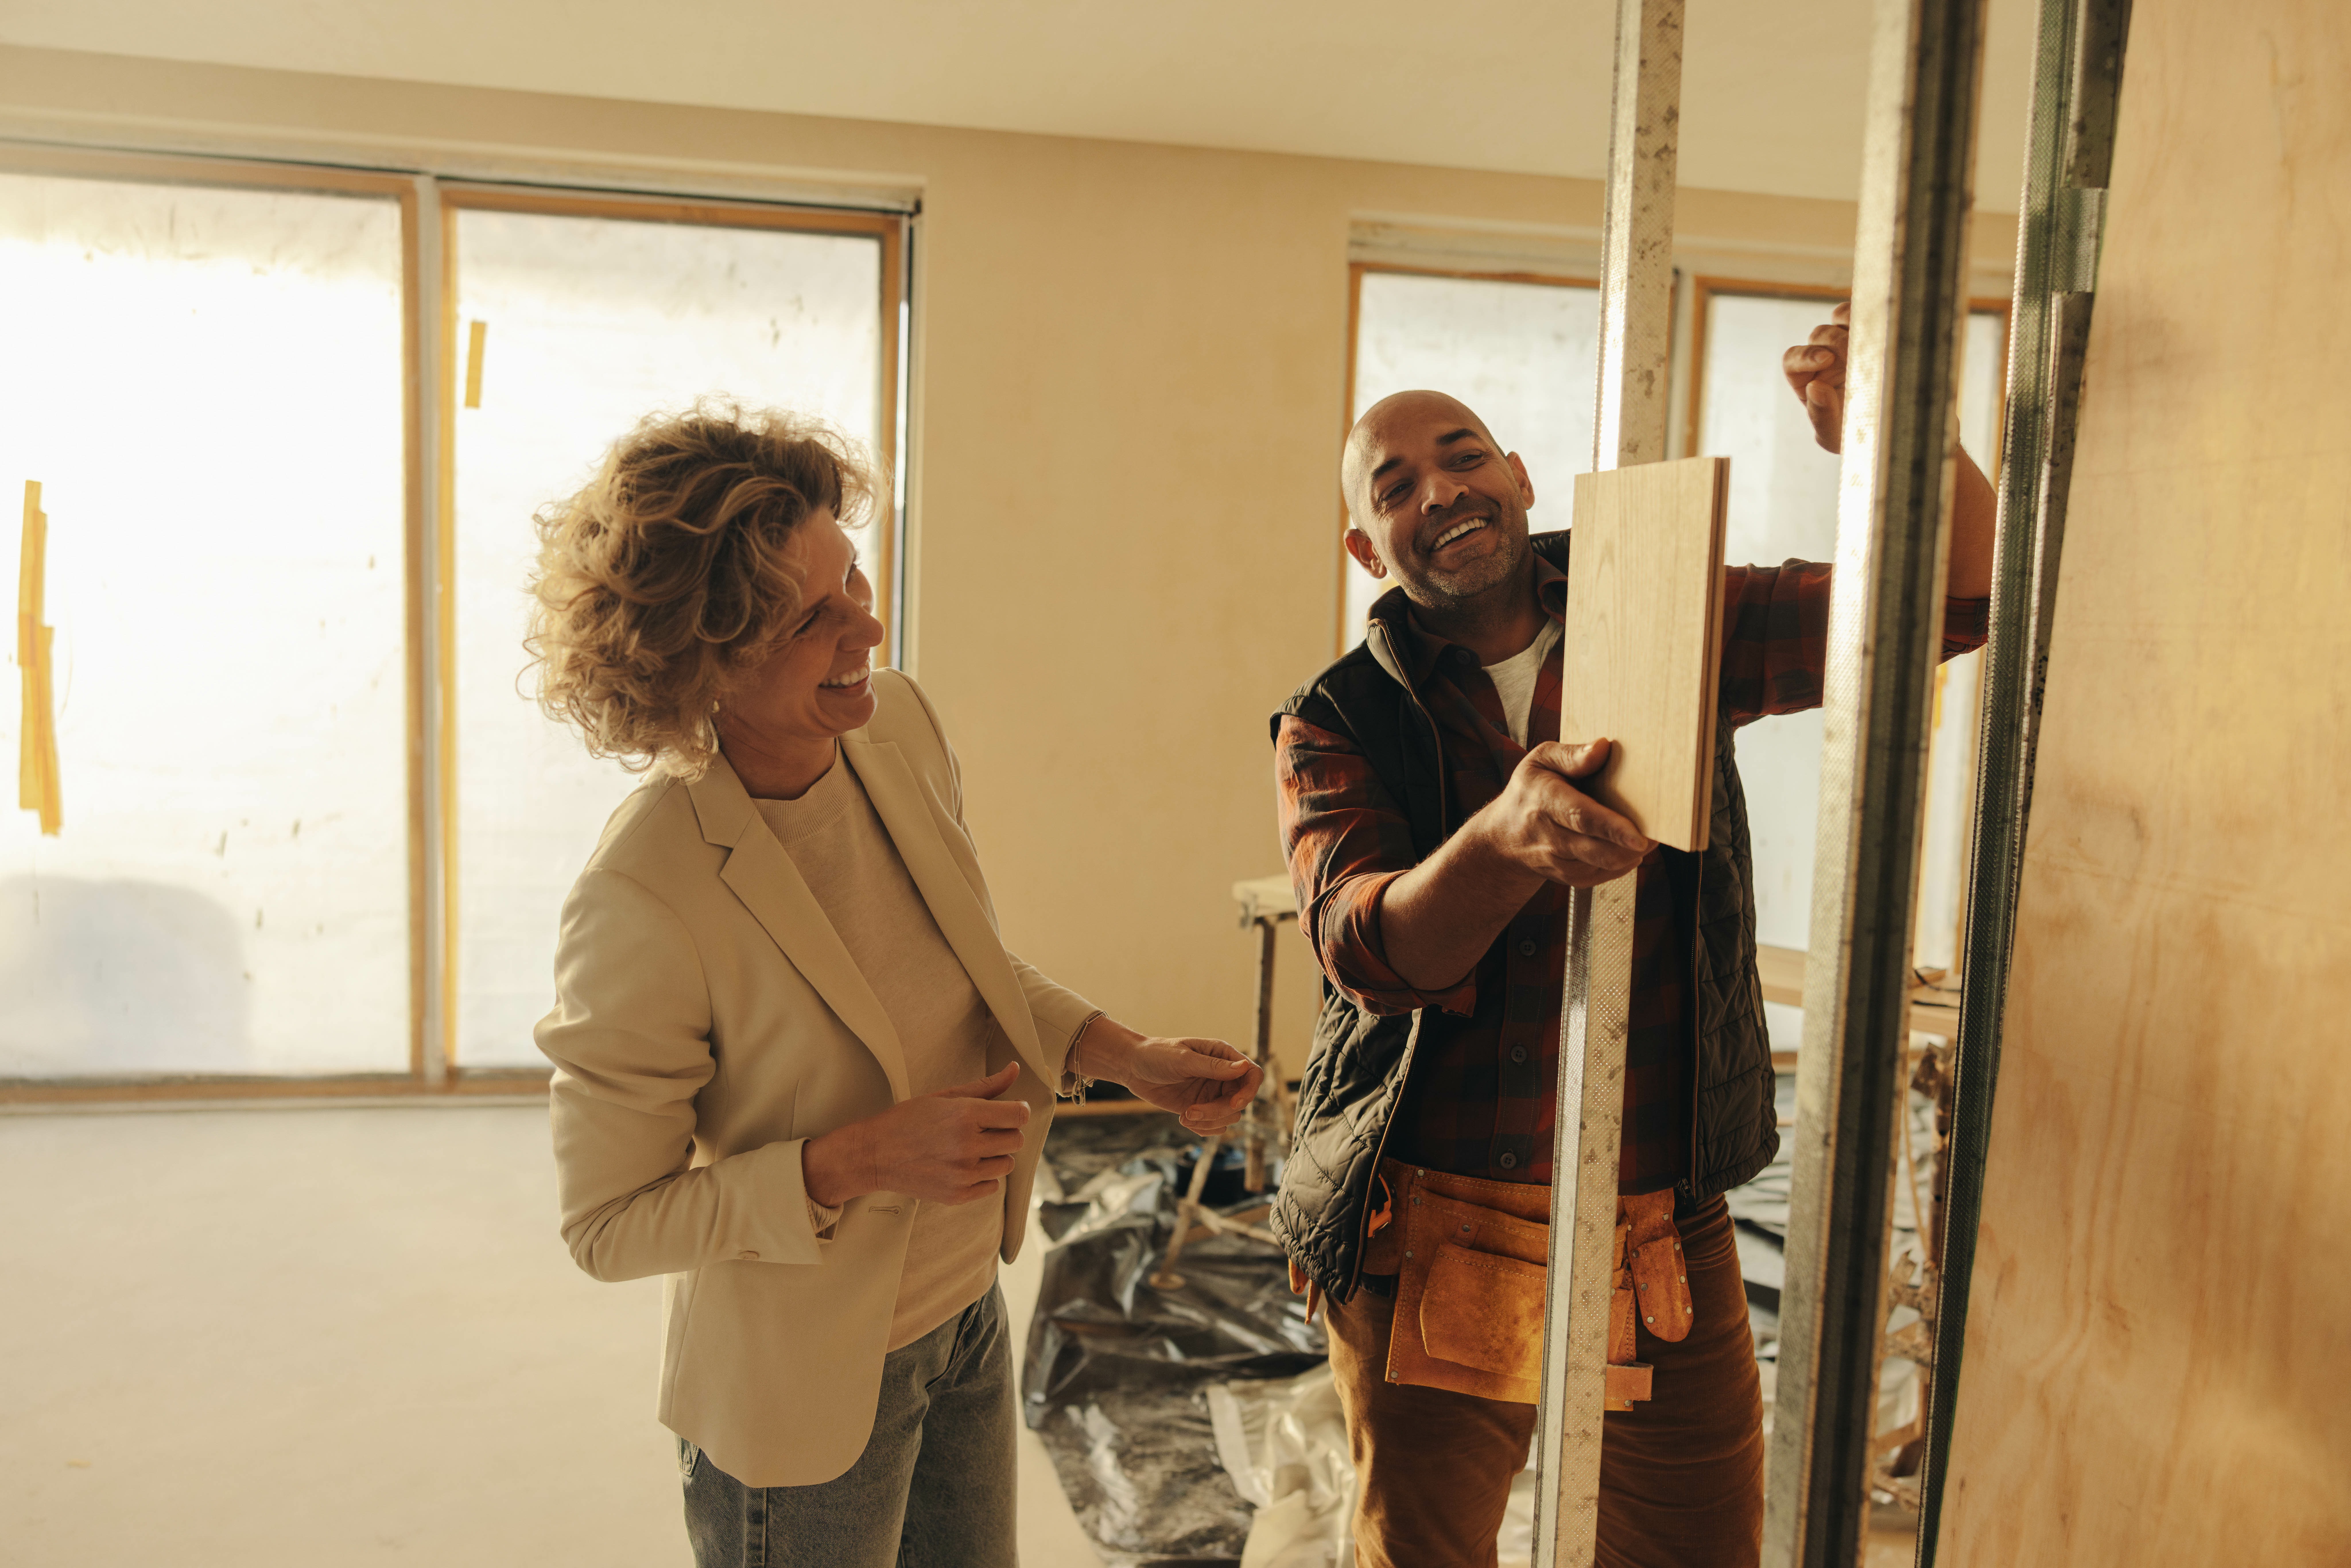 Happy contractor and interior designer plan a renovation inside a house. They discuss the doors, matching a wood sample against a doorframe for the interior remodel. Collaboration for a property upgrade.